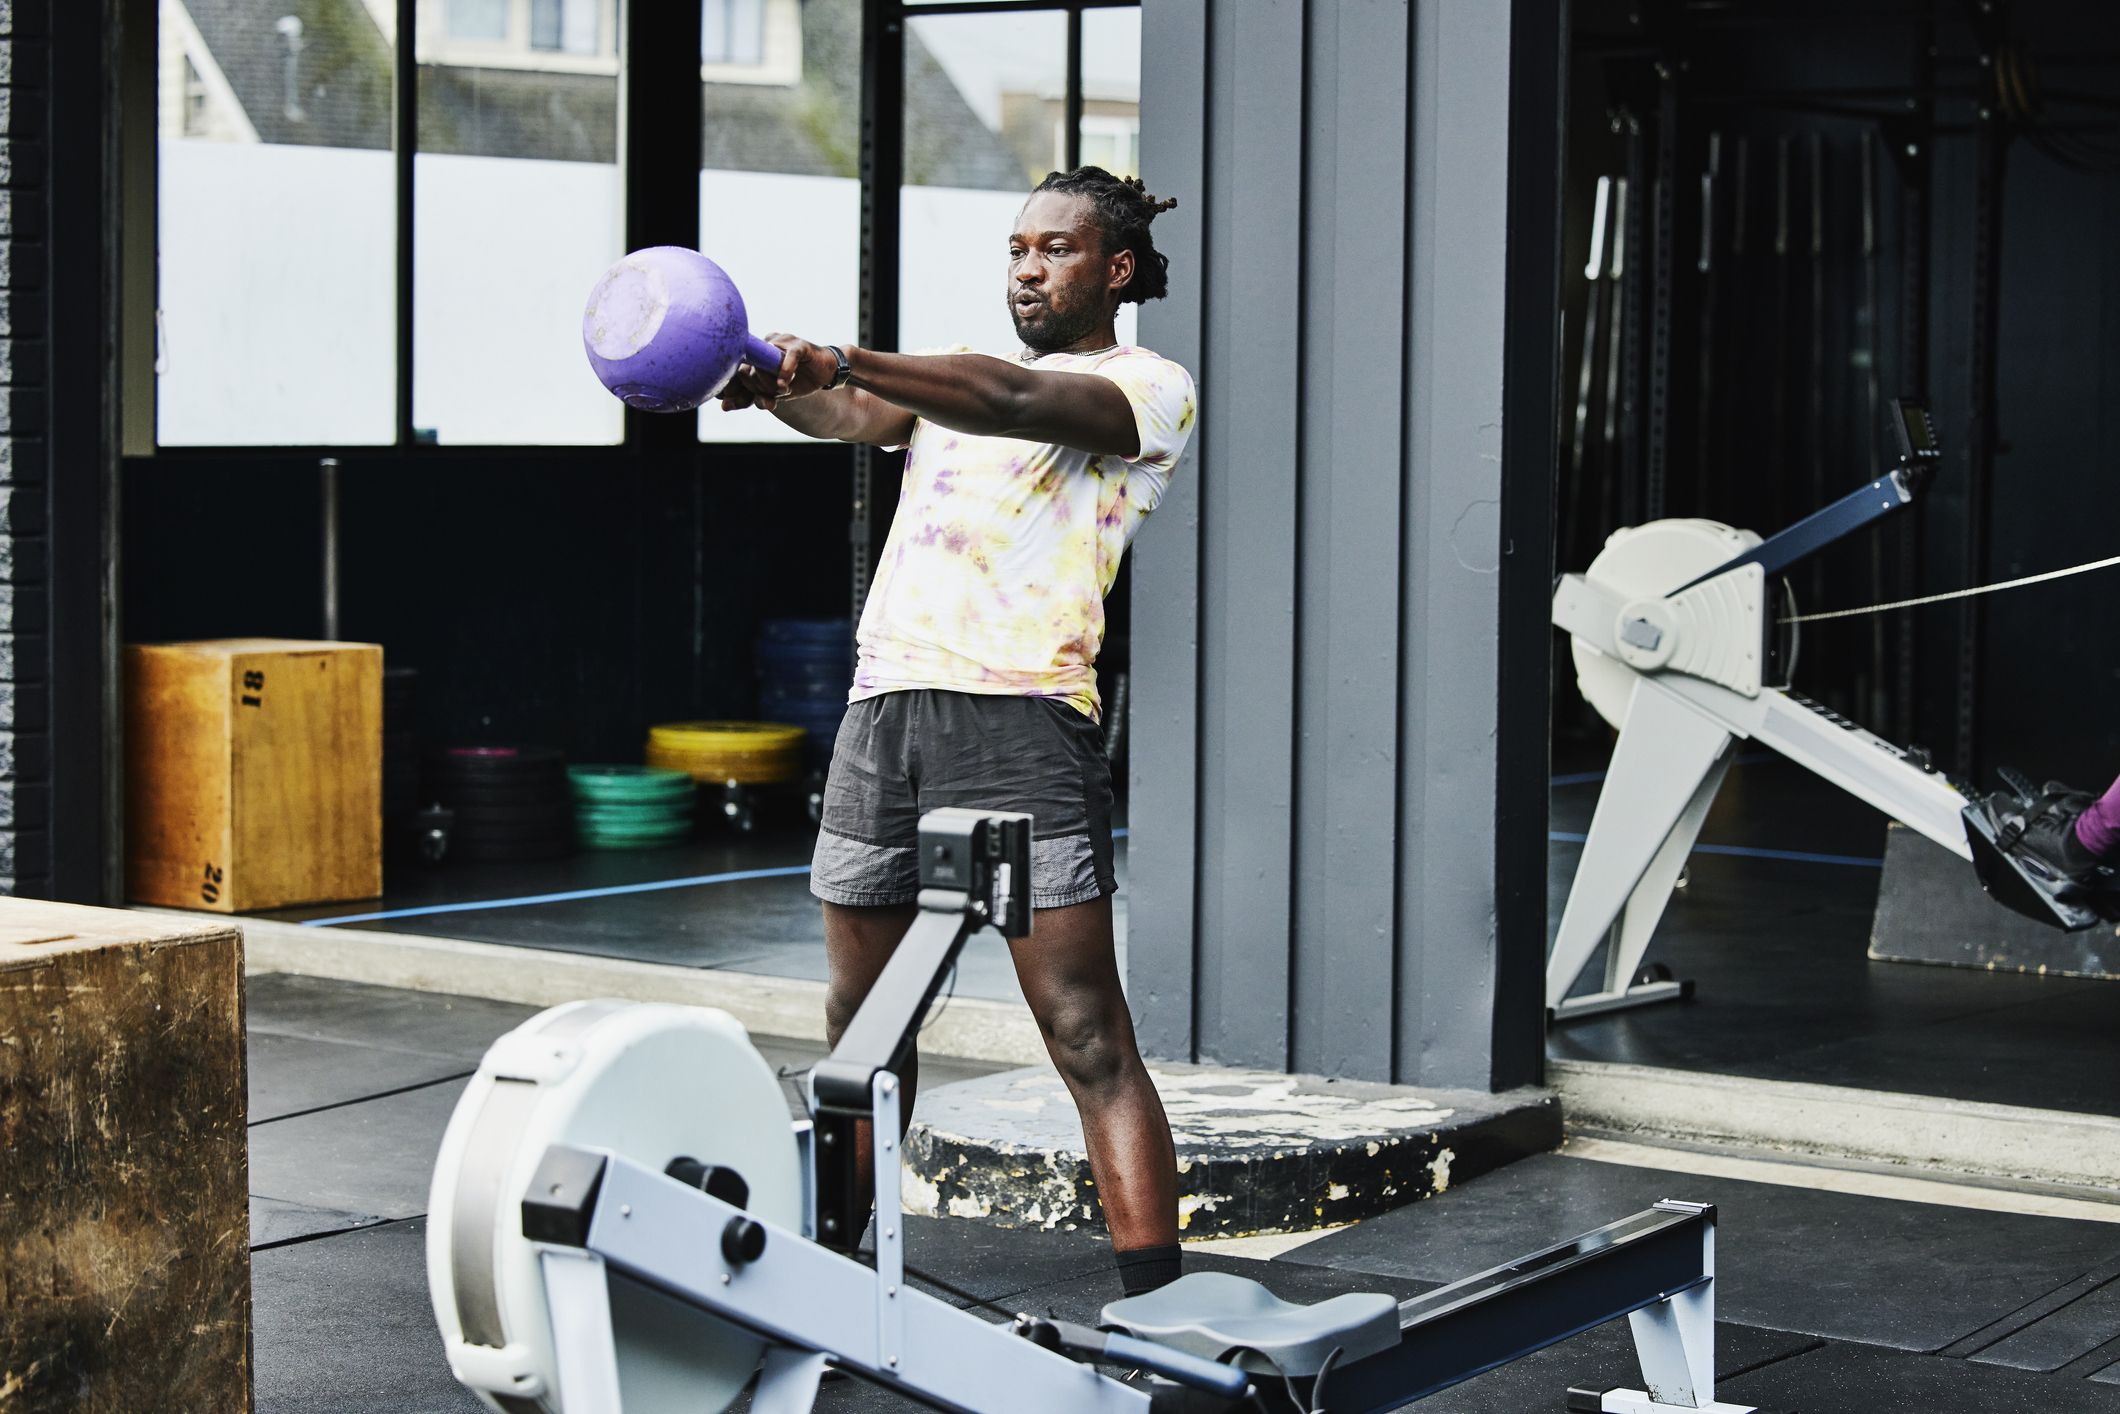 how to do a kettlebell swing